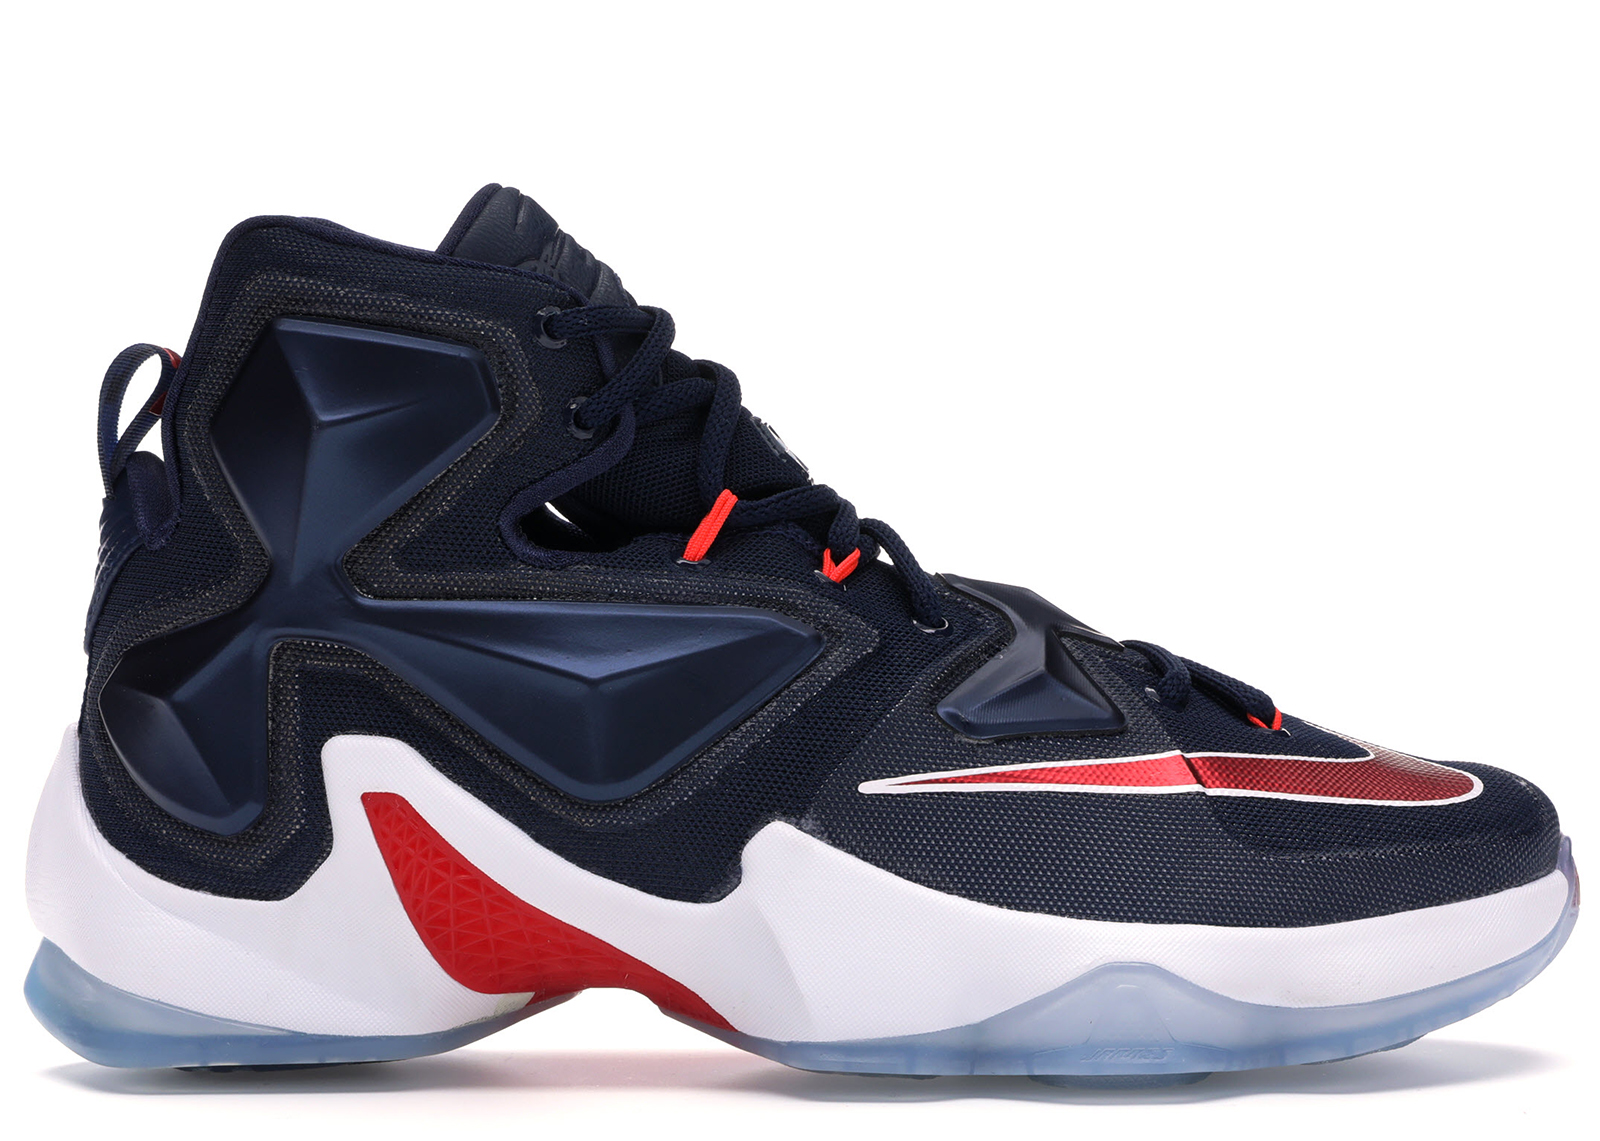 lebron 13 blue and red